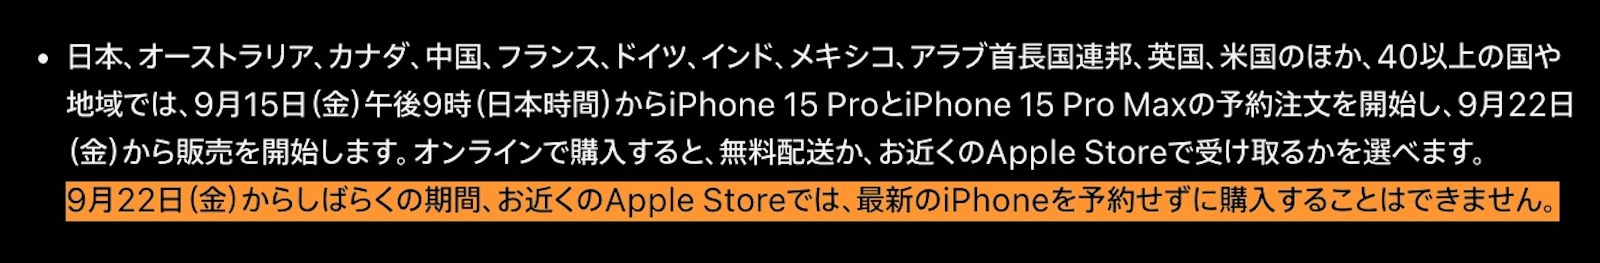 Reservation needed to buy iphone15